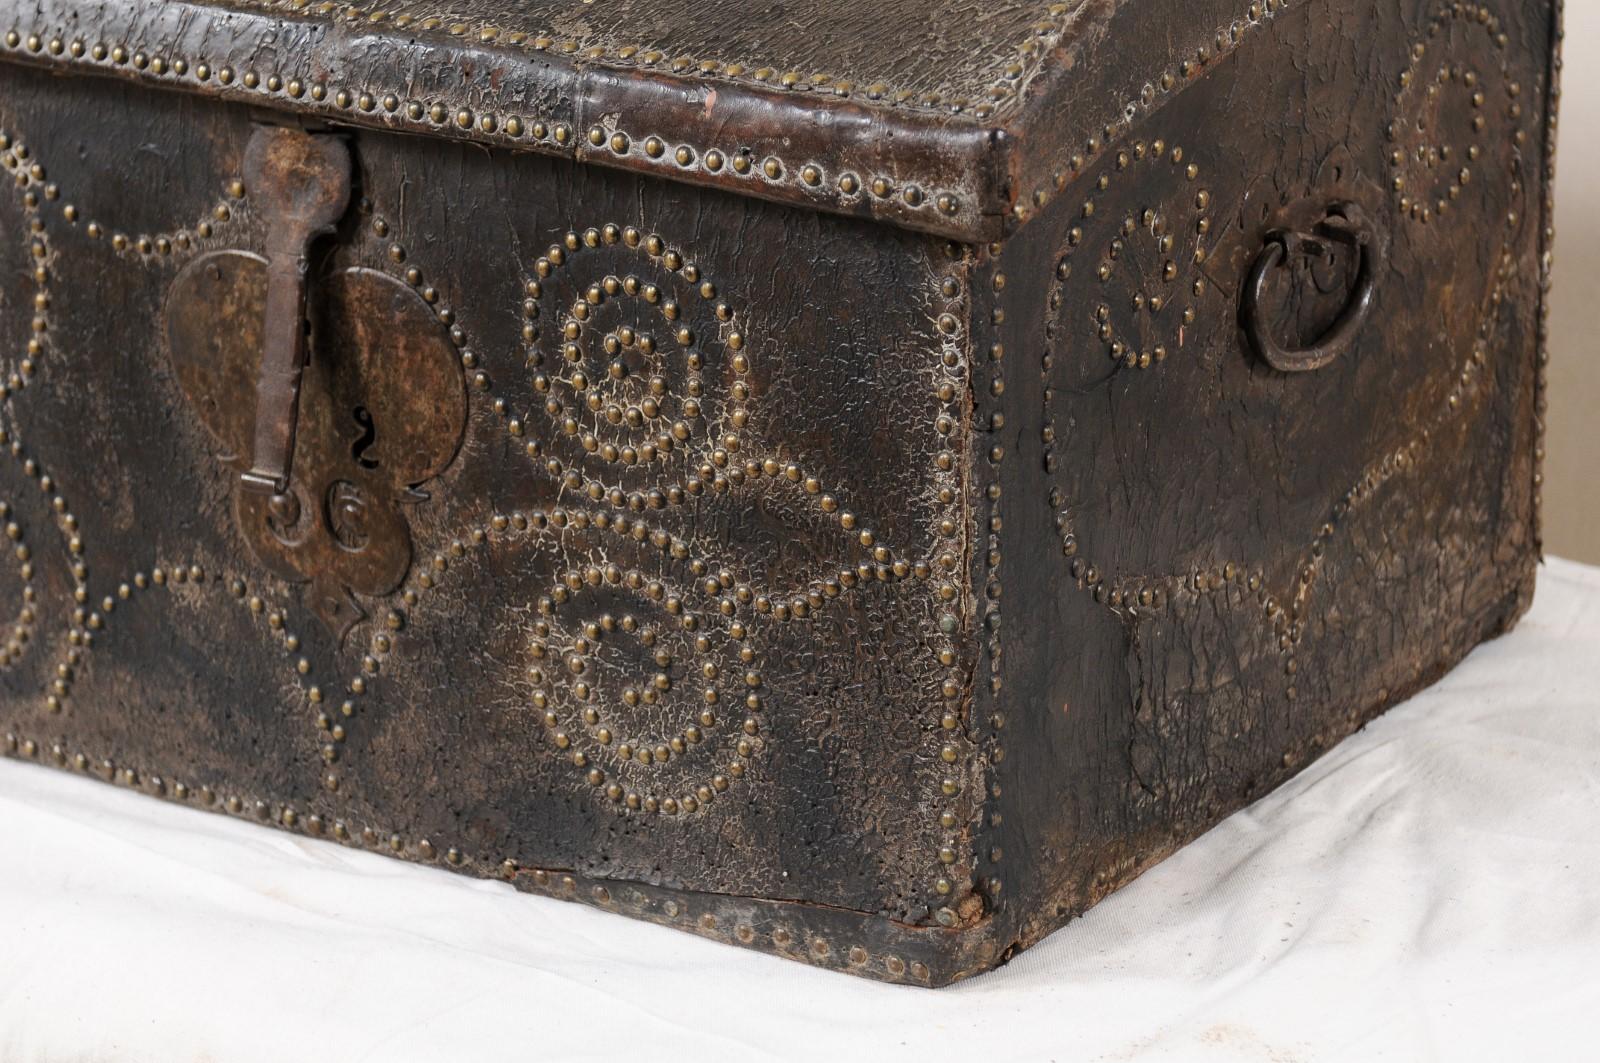 18th Century Spanish Leather-Wrapped Coffer with Nail Head Decor Trimmings